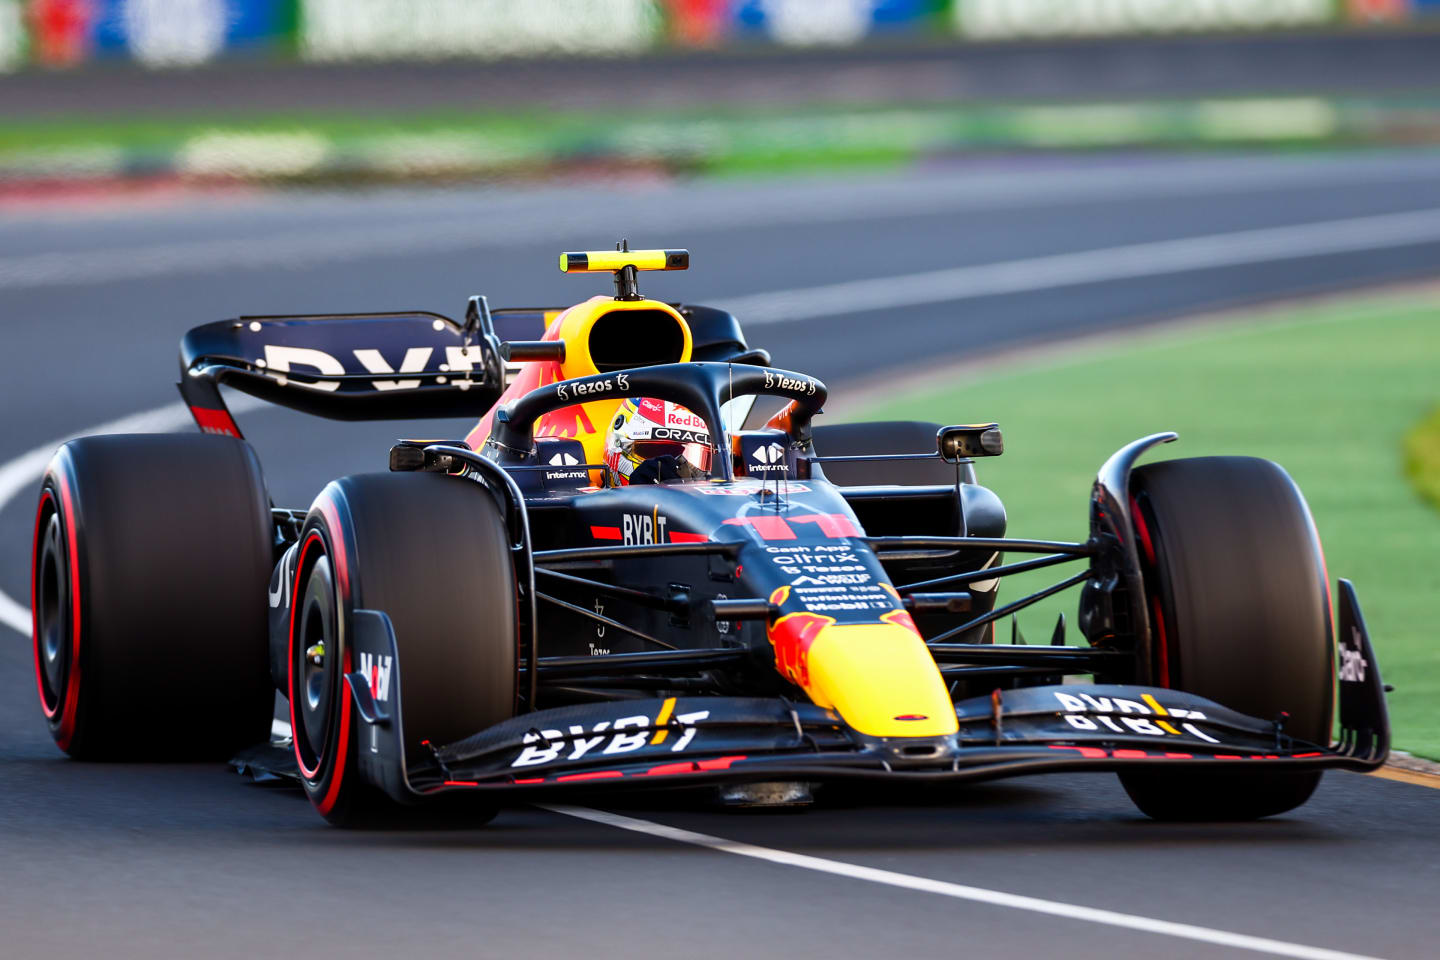 MELBOURNE, AUSTRALIA - APRIL 09: Sergio Perez of Mexico and Red Bull Racing during qualifying ahead of the F1 Grand Prix of Australia at Melbourne Grand Prix Circuit on April 09, 2022 in Melbourne, Australia. (Photo by Peter Fox/Getty Images)